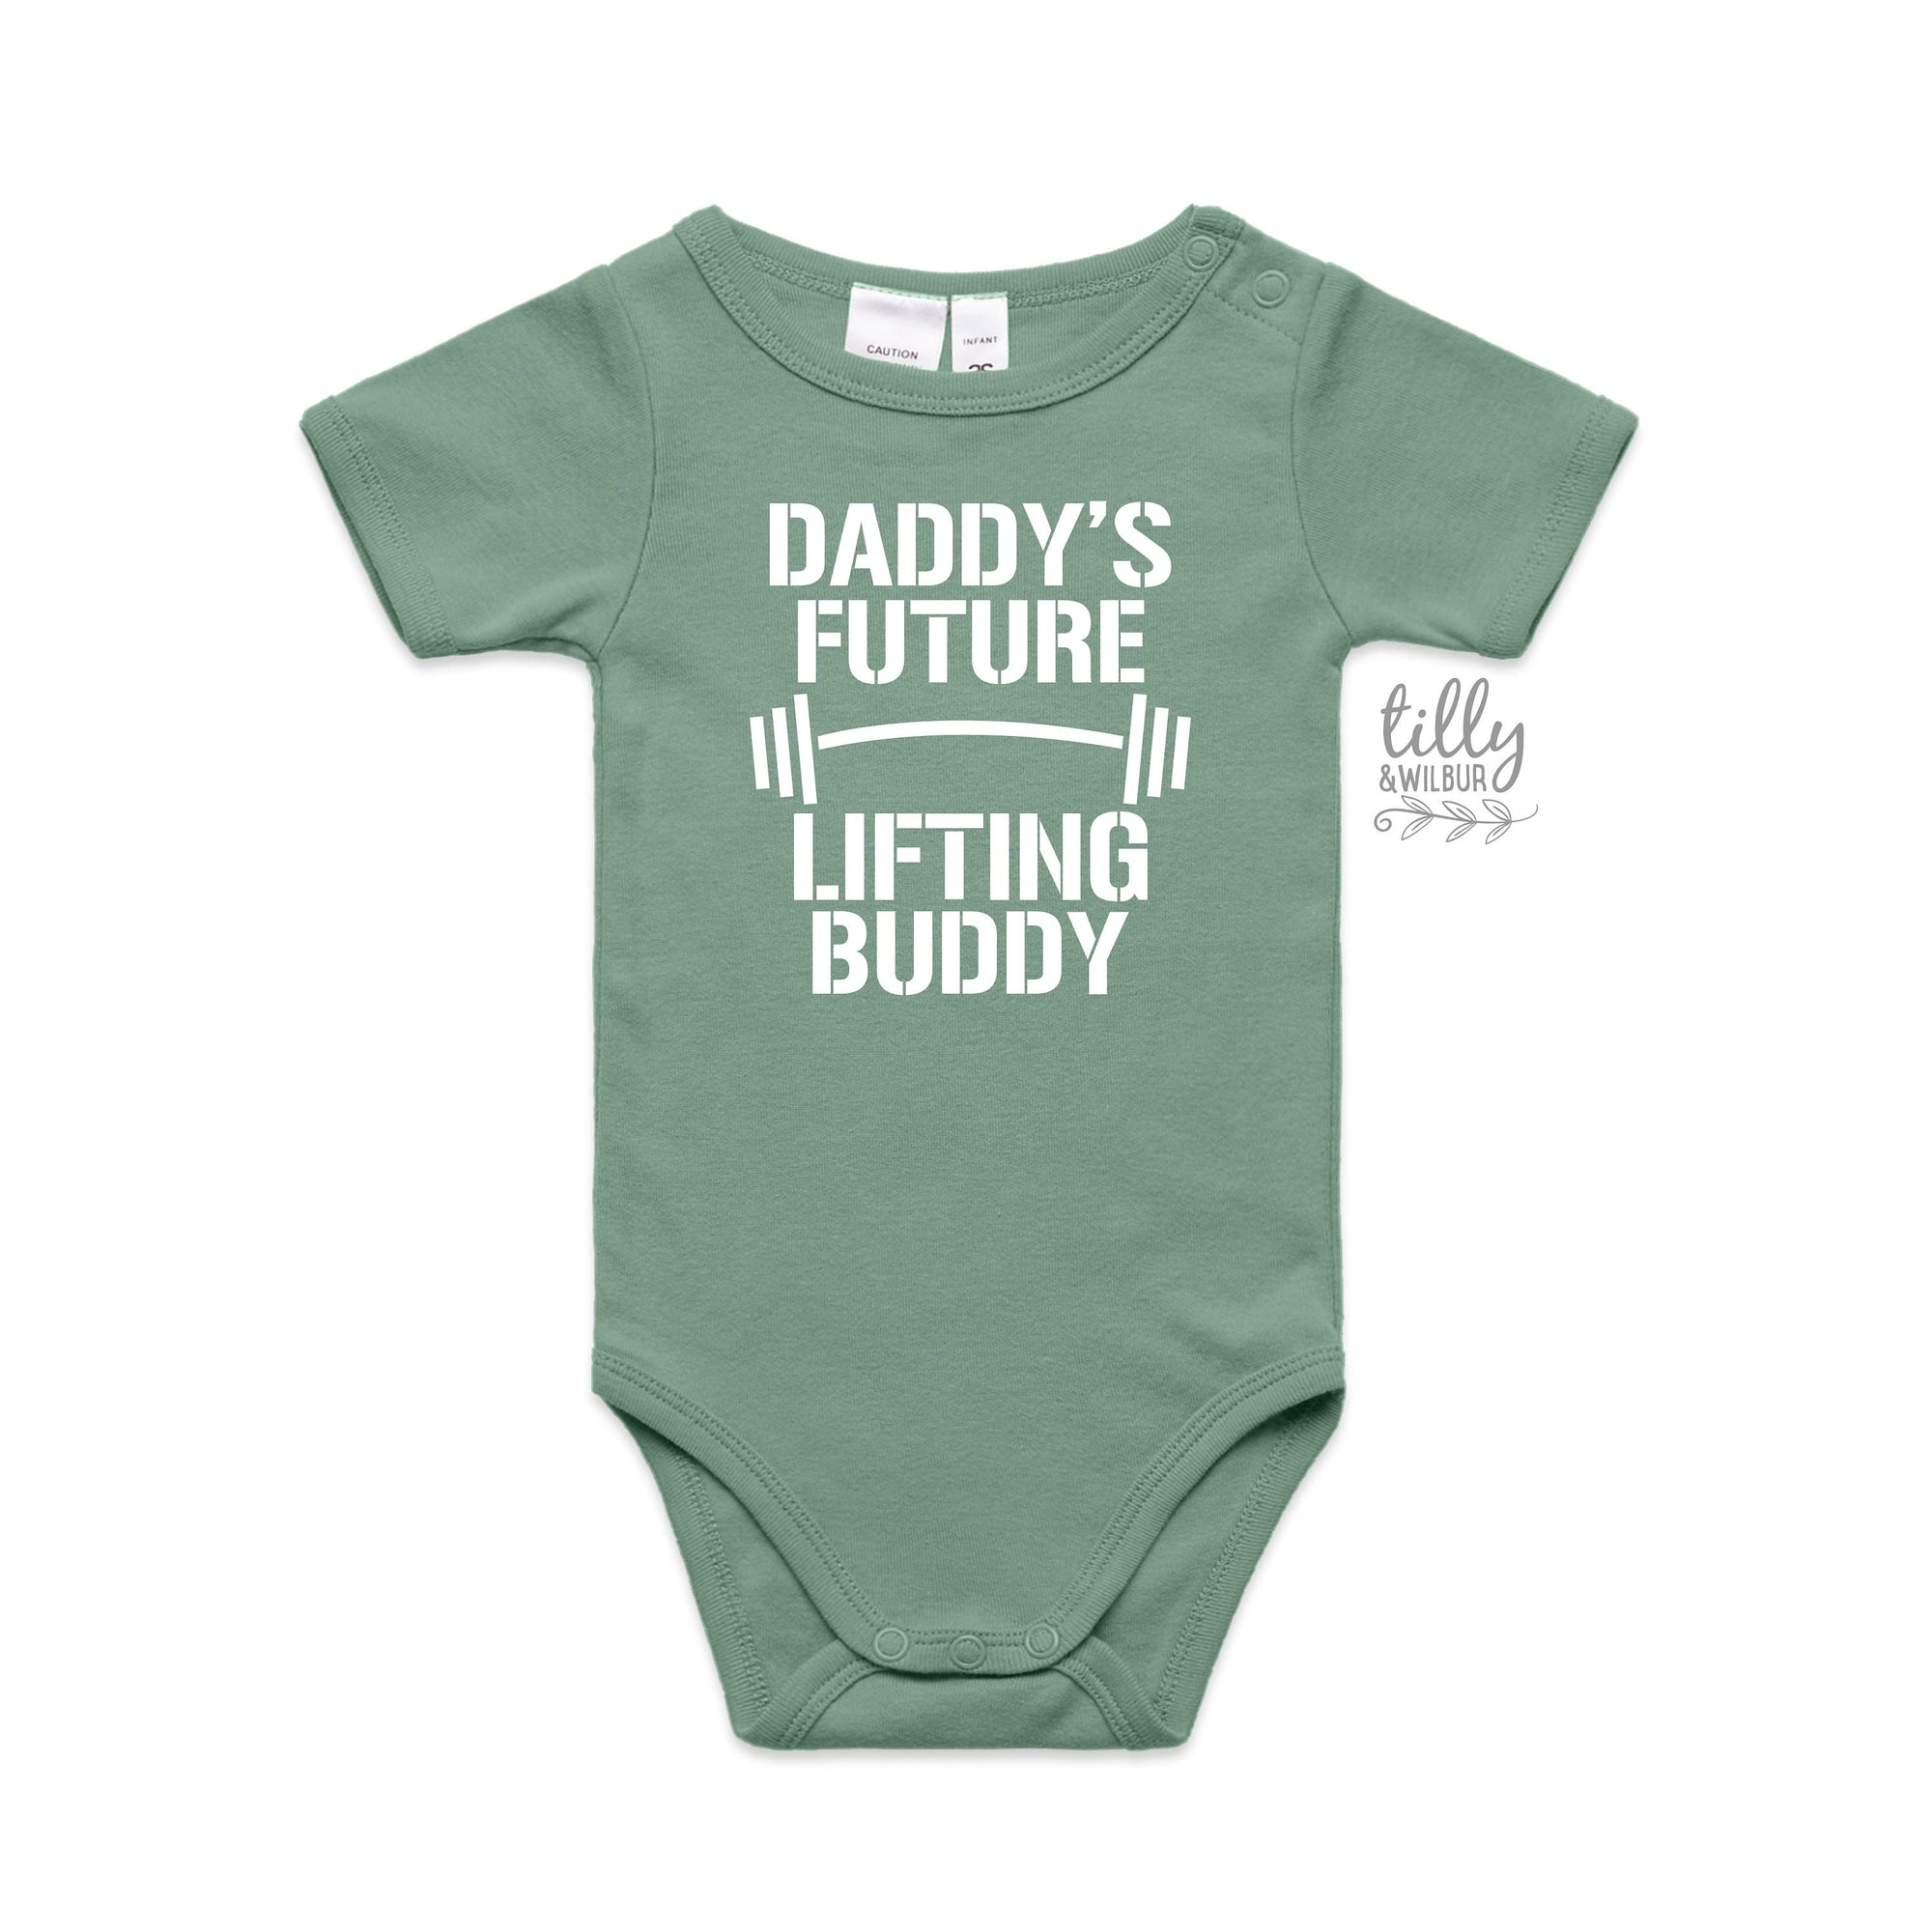 Daddy's Future Lifting Buddy, Daddy Bodysuit, Daddy Baby Clothes, New Dad Gift, Dad Gym, Dad Workout, Pregnancy Announcement, Baby Reveal